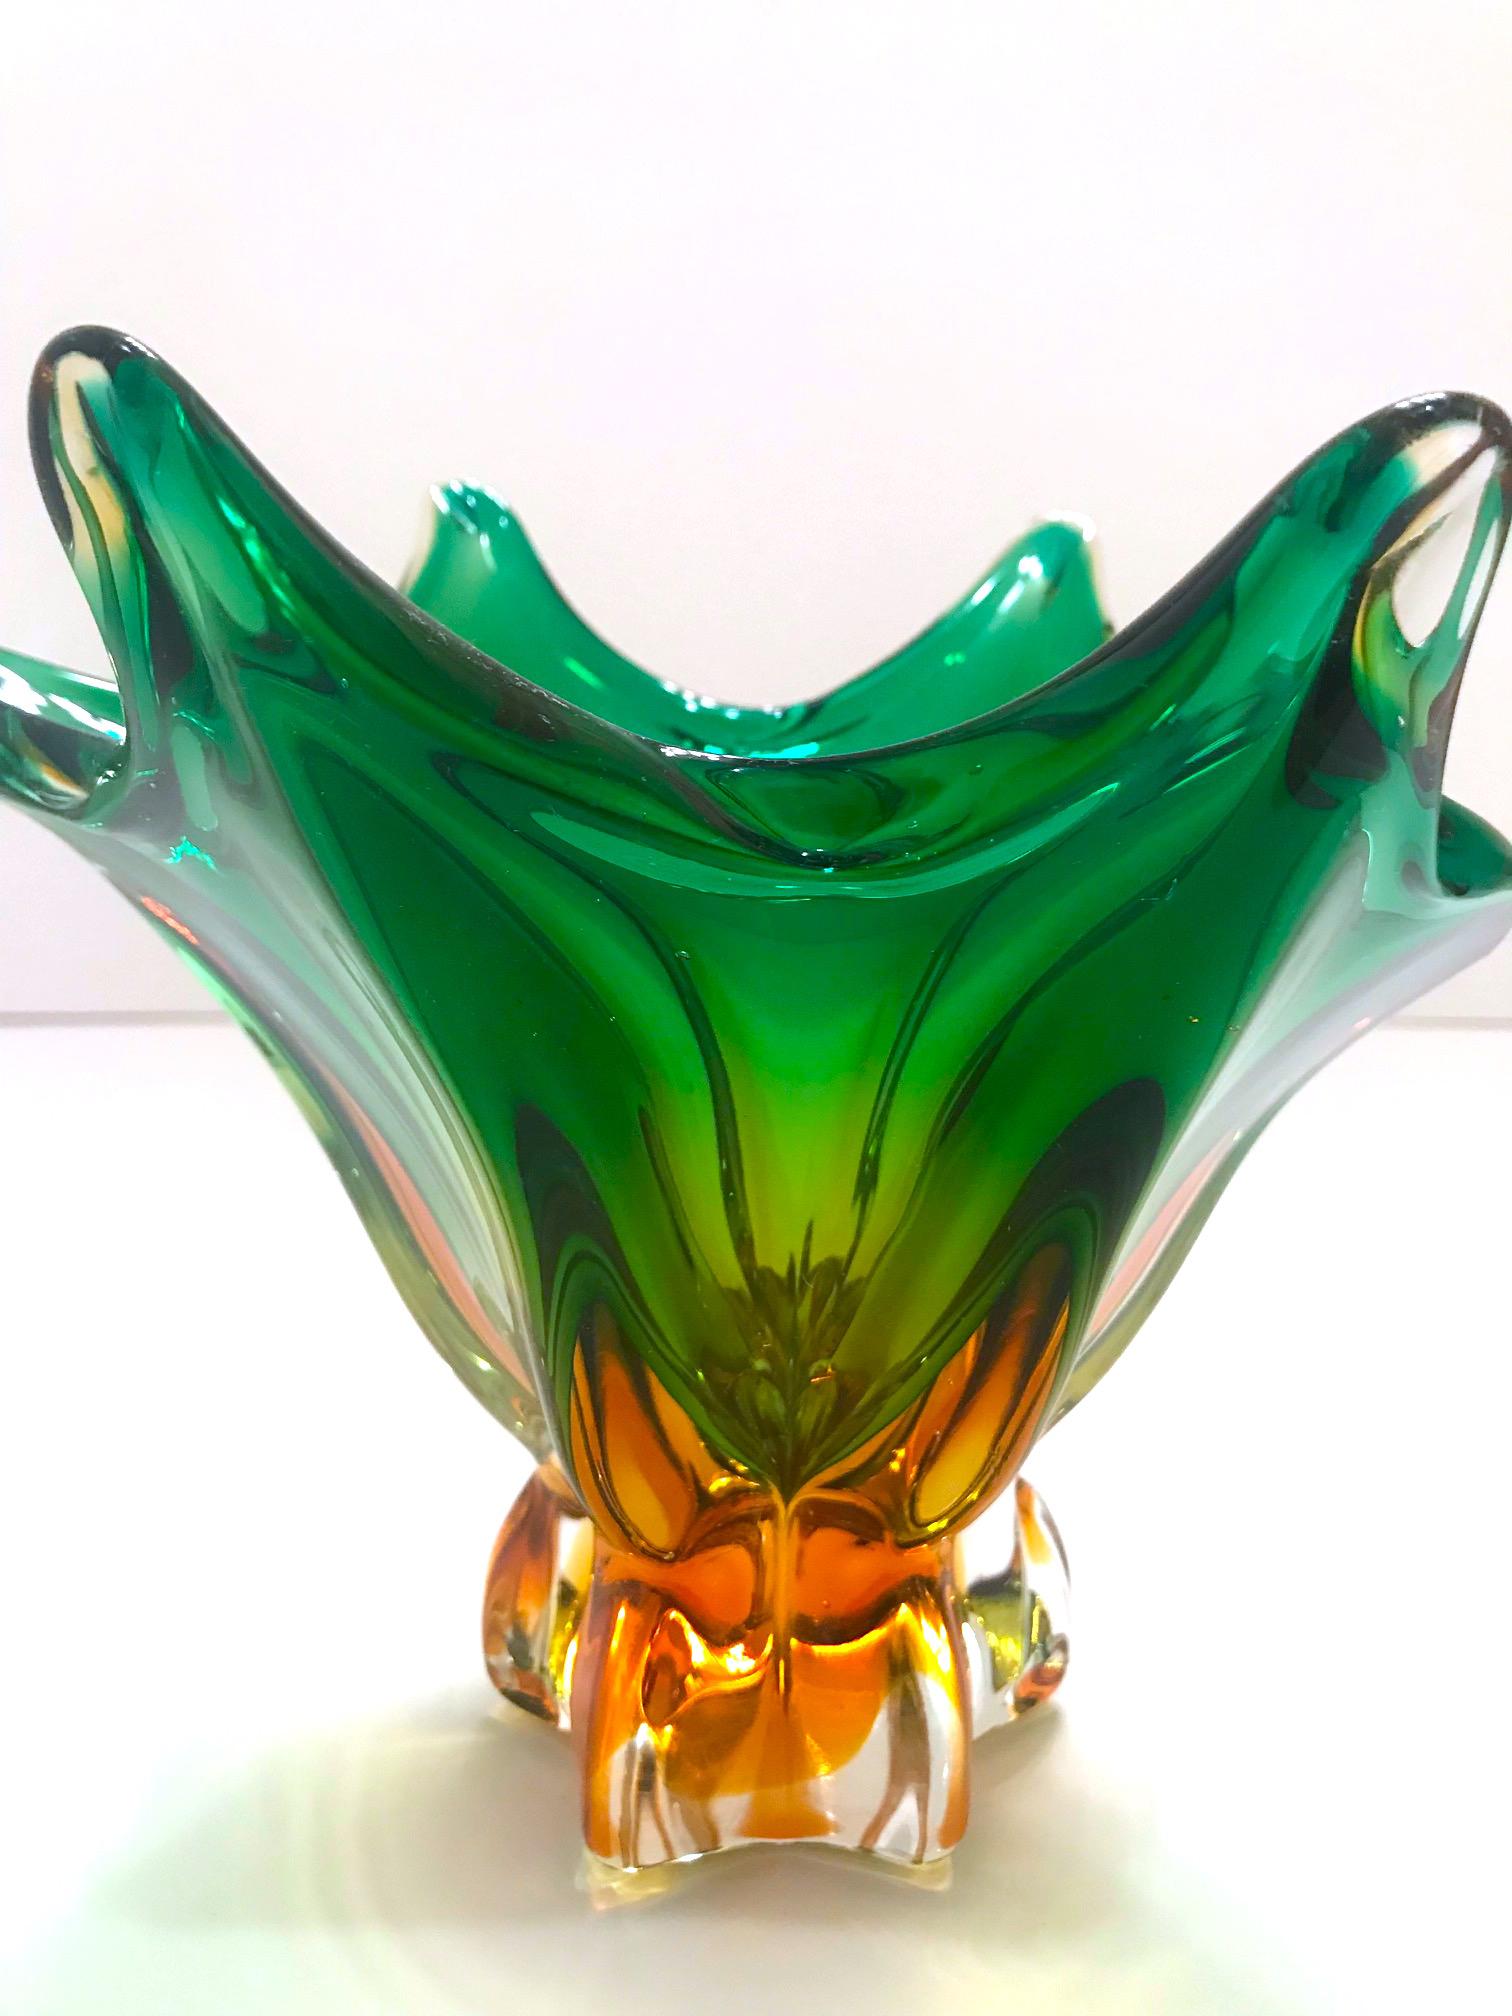 Stunning Mid-Century Modern footed bowl or vase in hand blown Murano glass. Features abstract floral design reminiscent of a lily in clear cased glass with submerged hues of deep amber and vibrant emerald. Gorgeous from every angle.